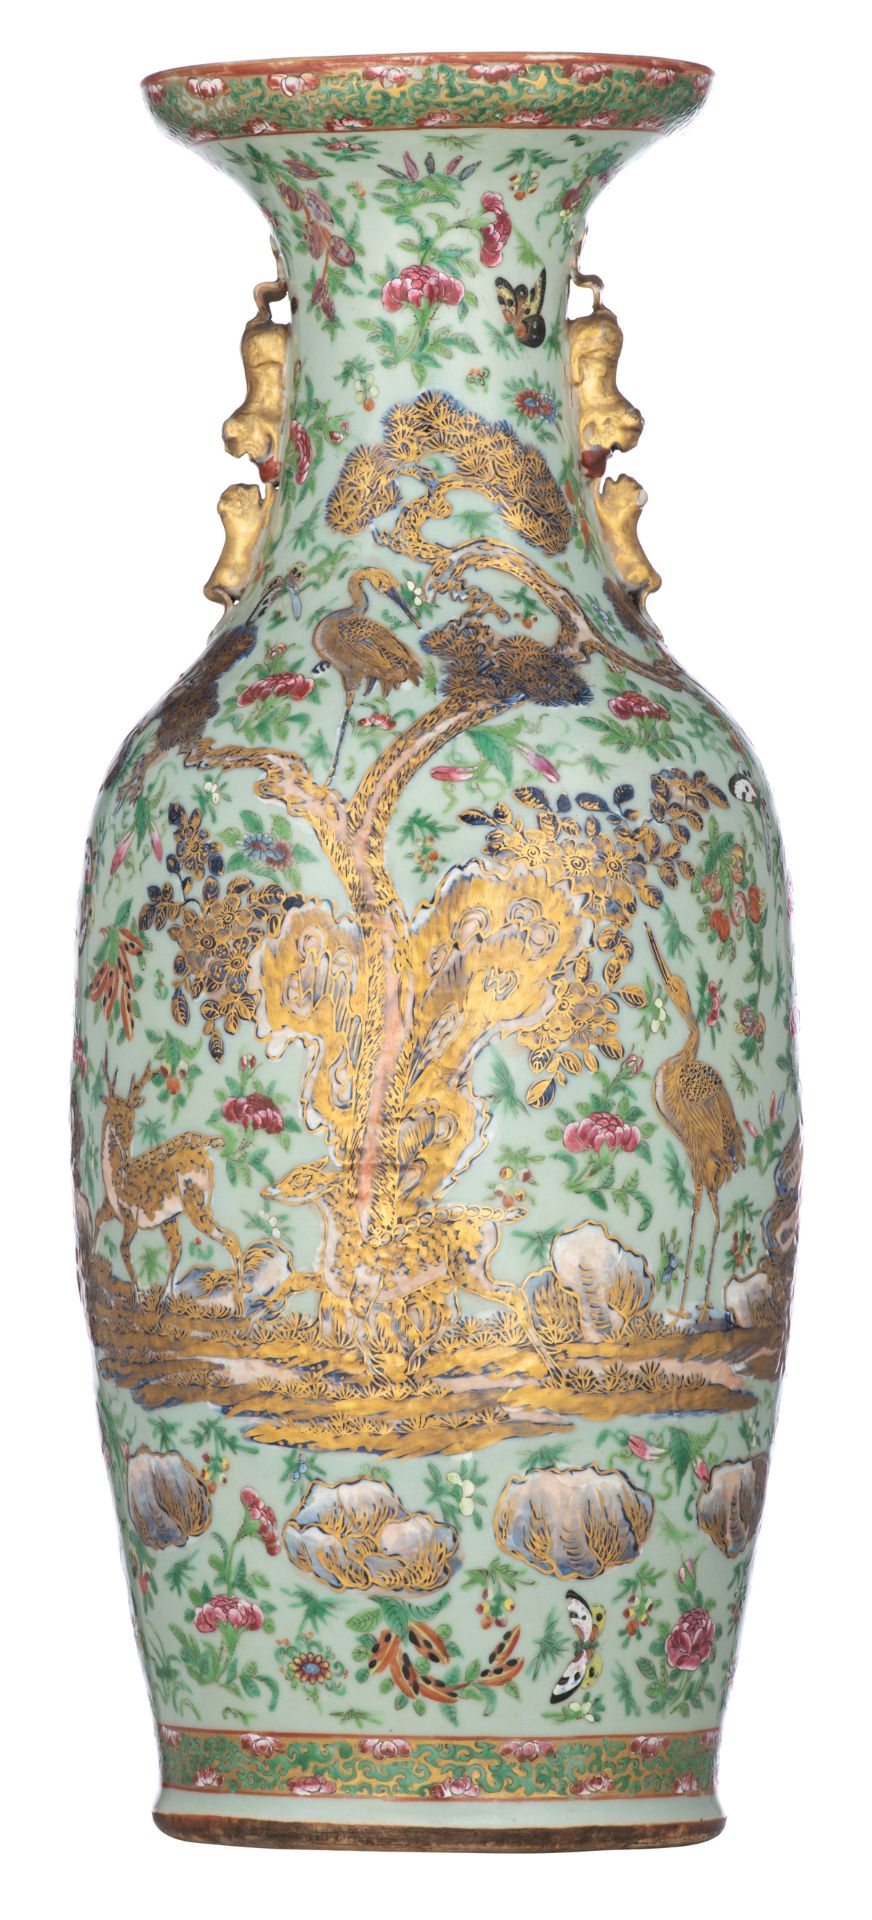 A Chinese celadon ground gilt and famille rose vase, decorated with deer, cranes, butterflies, birds